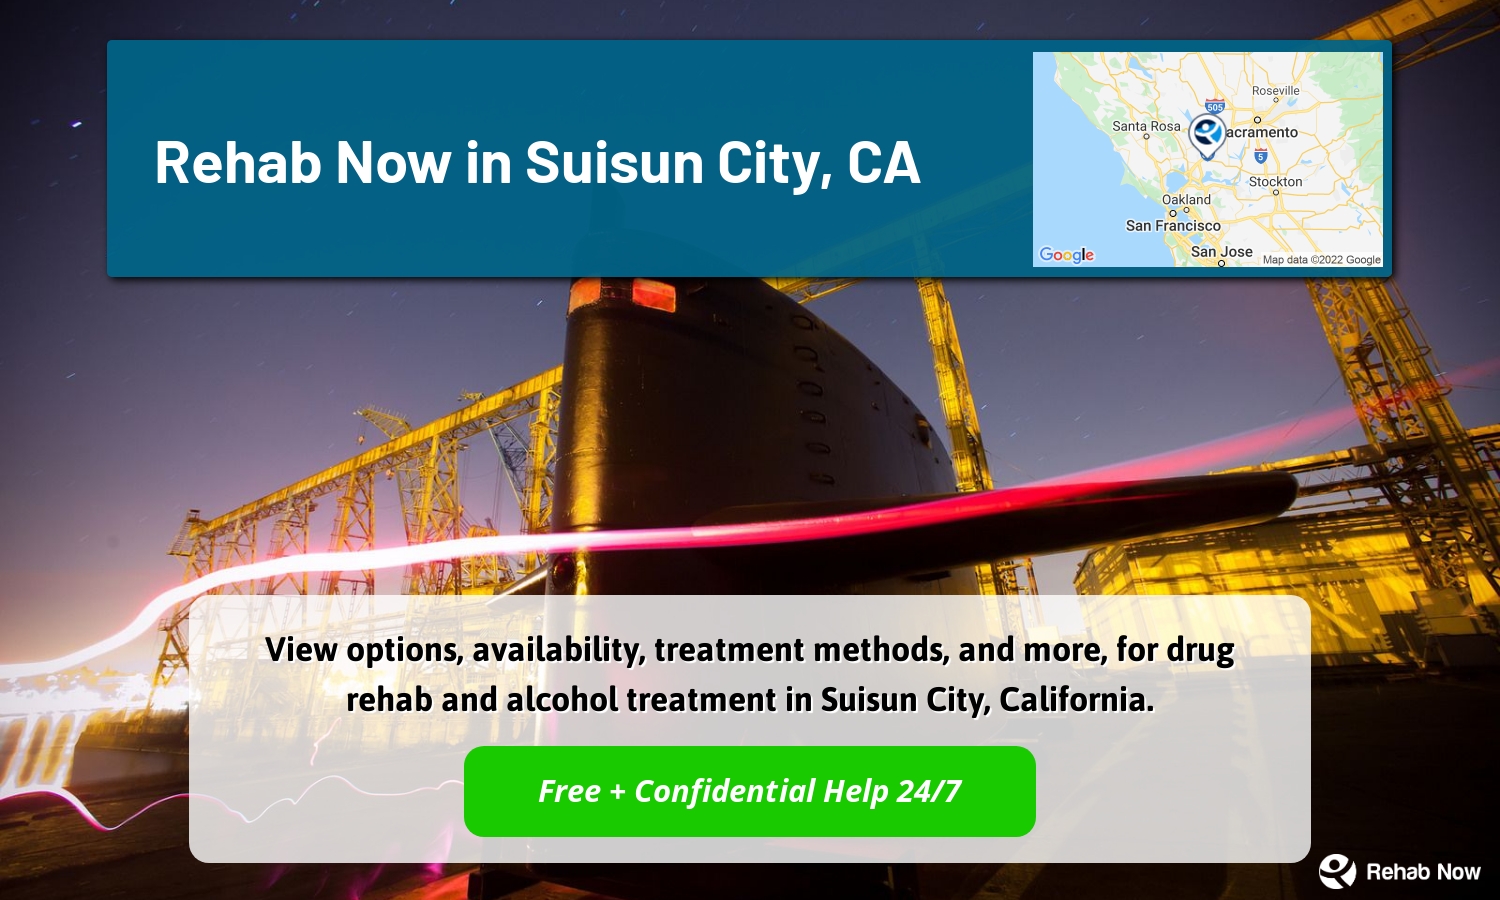 View options, availability, treatment methods, and more, for drug rehab and alcohol treatment in Suisun City, California.